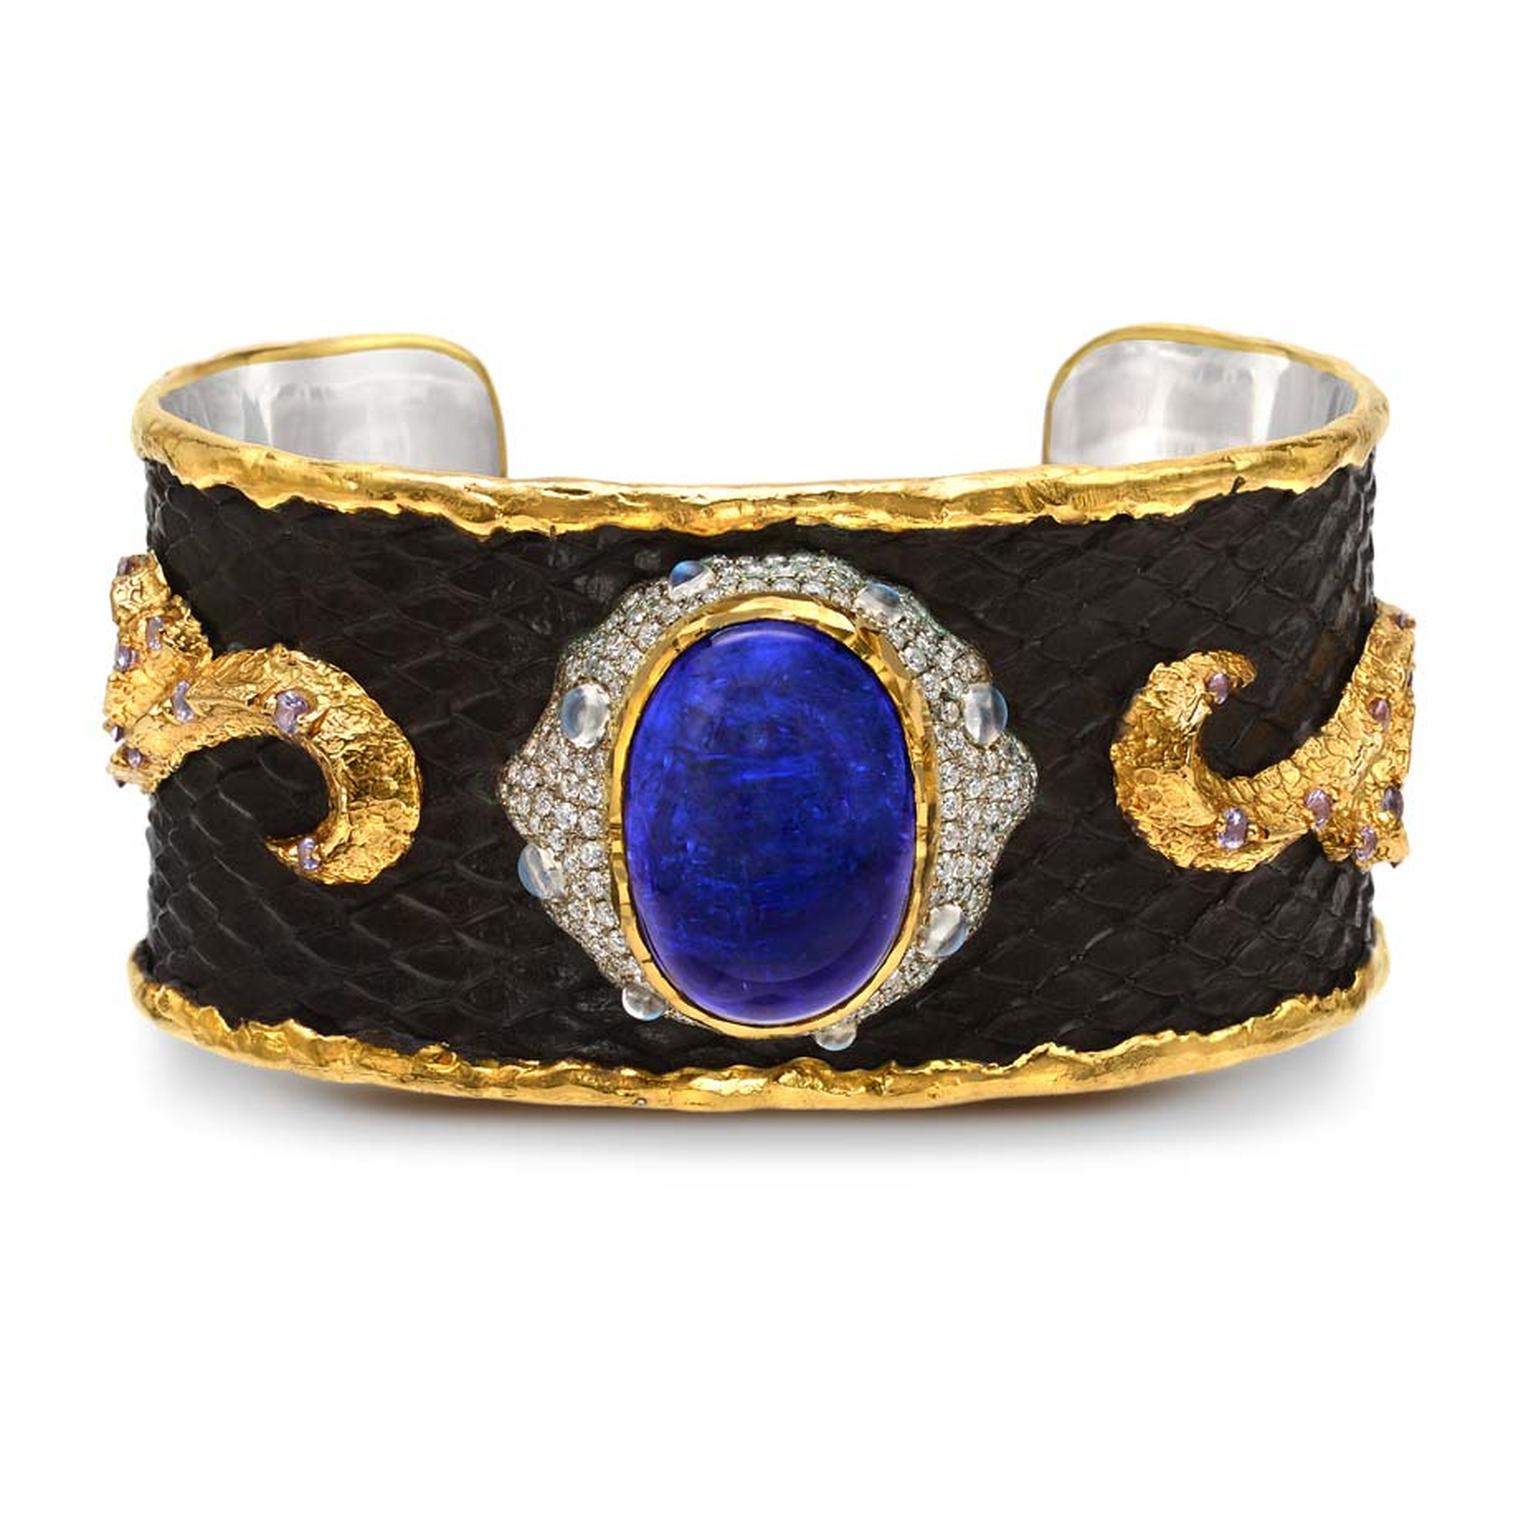 Victor Velyan gold and silver bracelet with a black patina, set with tanzanites, diamonds, moonstones and purple sapphires.